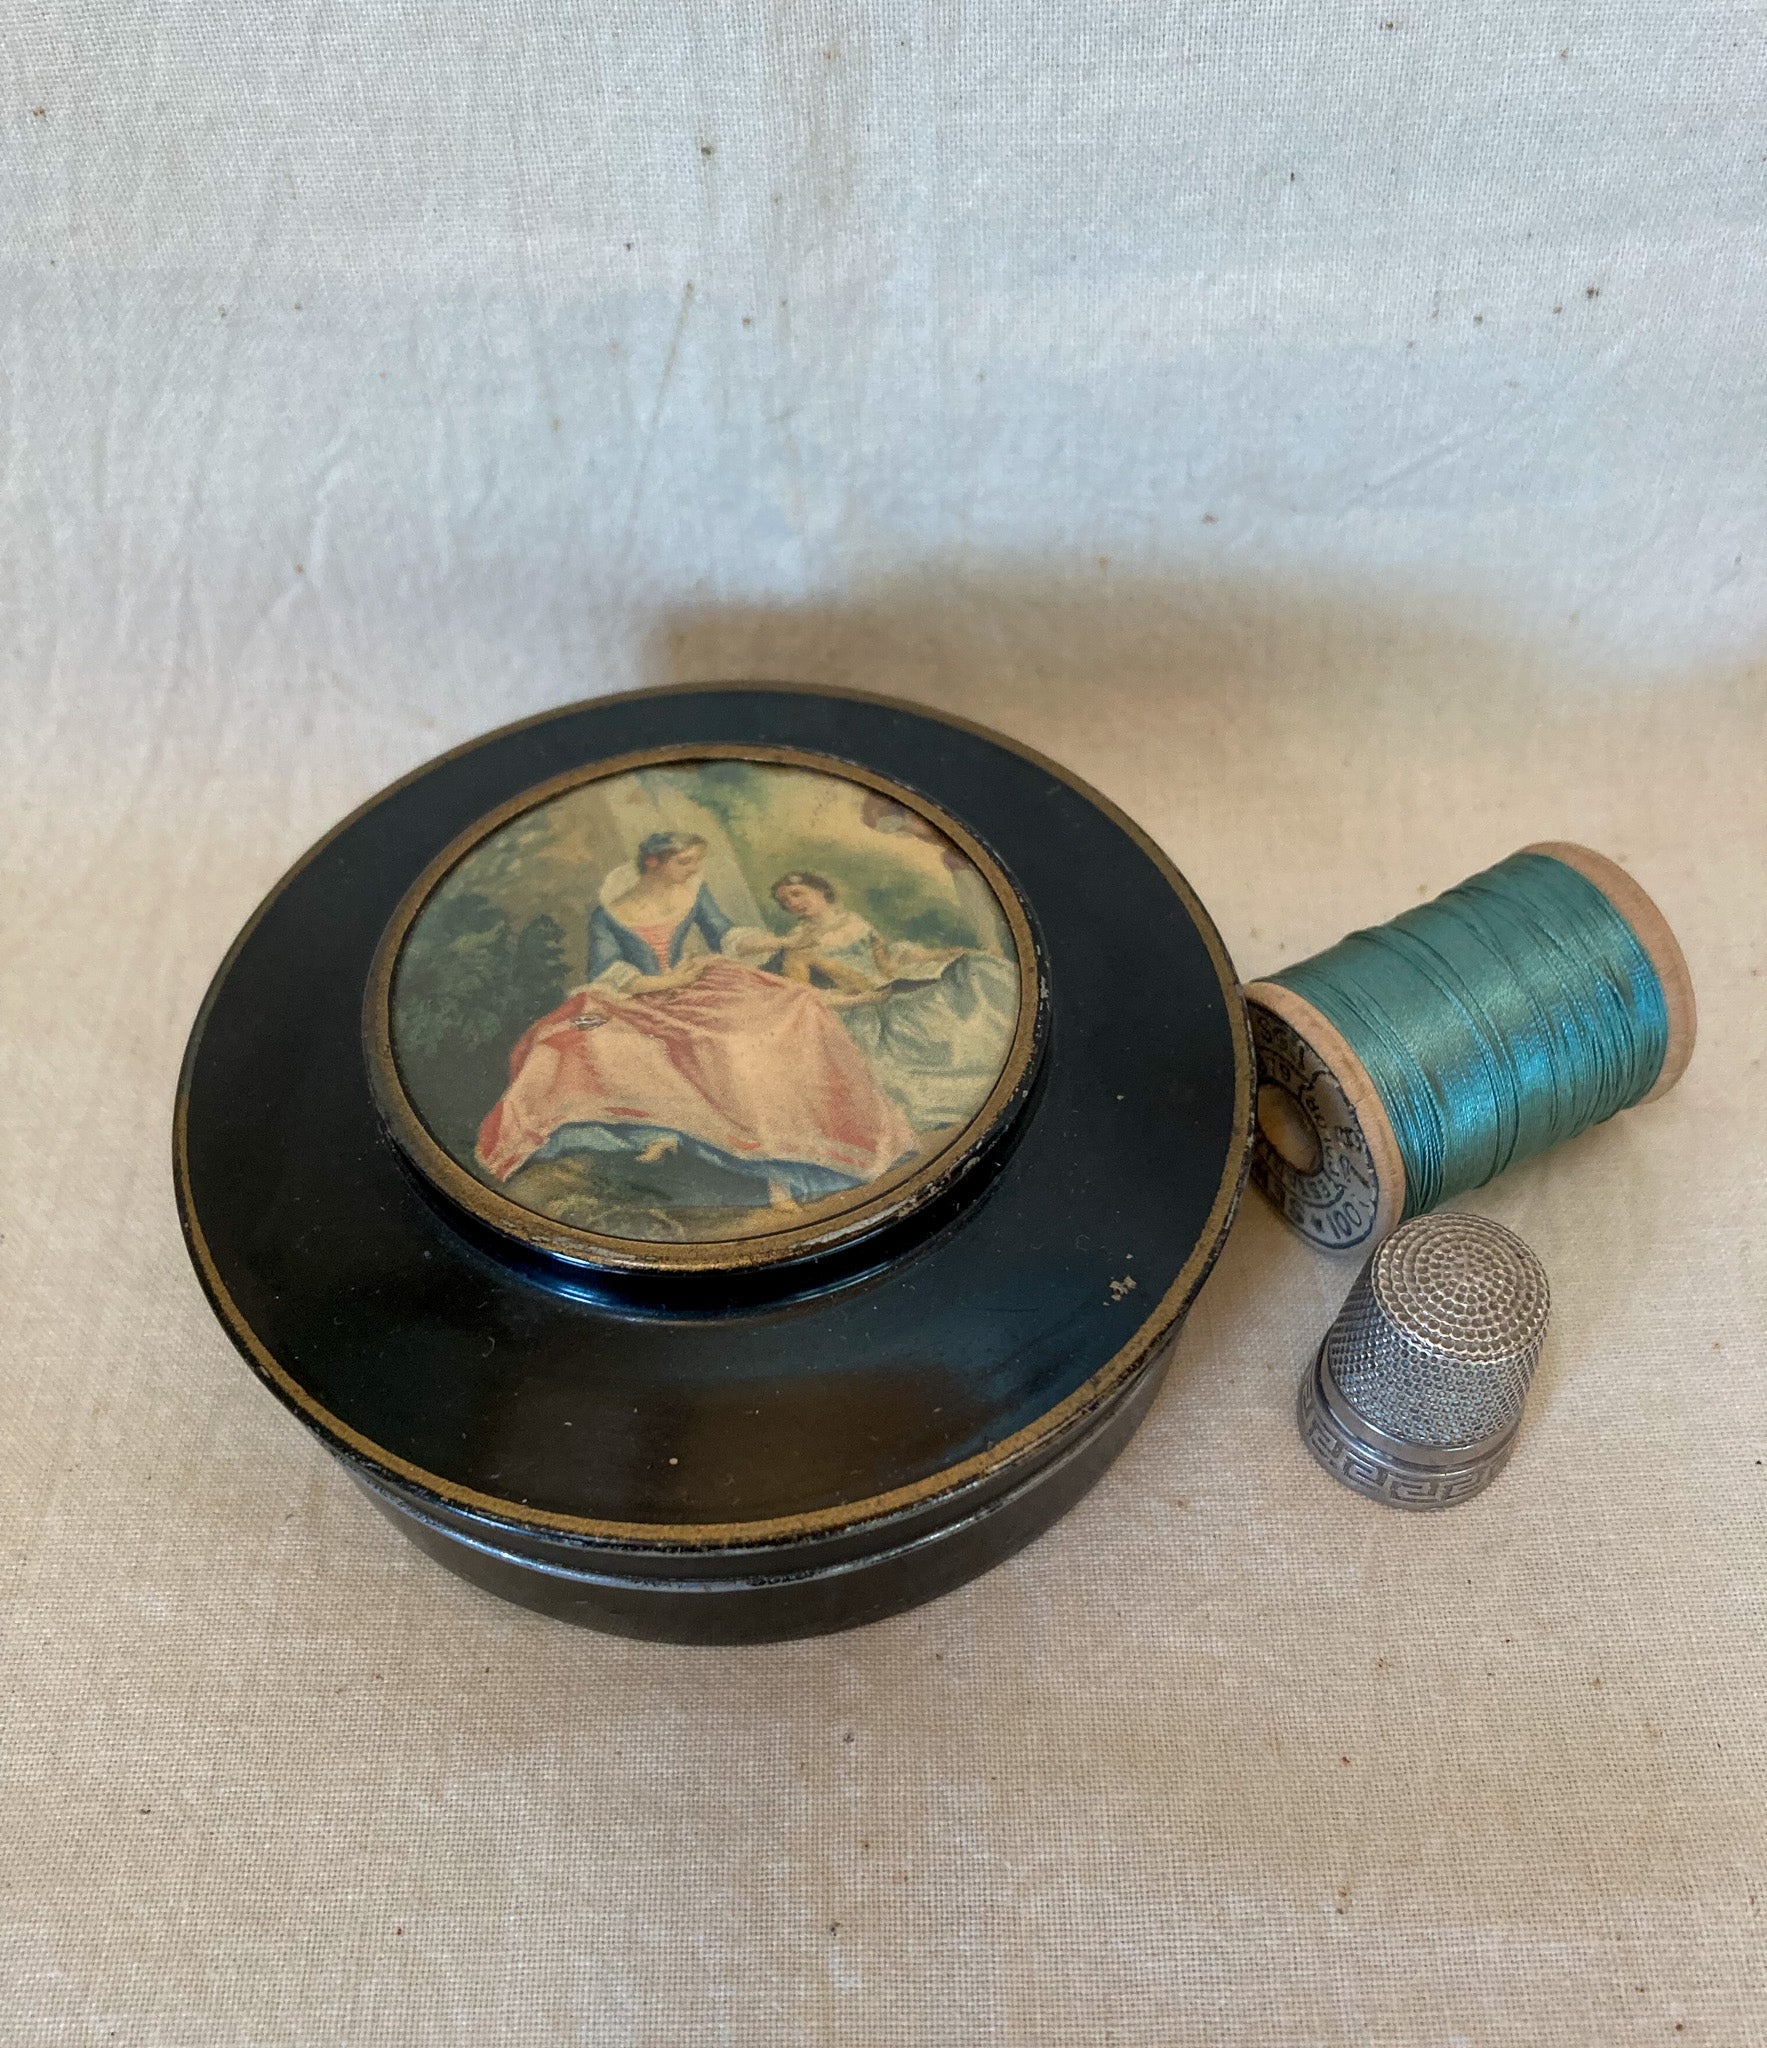 1920’s – 1930’s Powder Tin/Vanity Box with Buttons